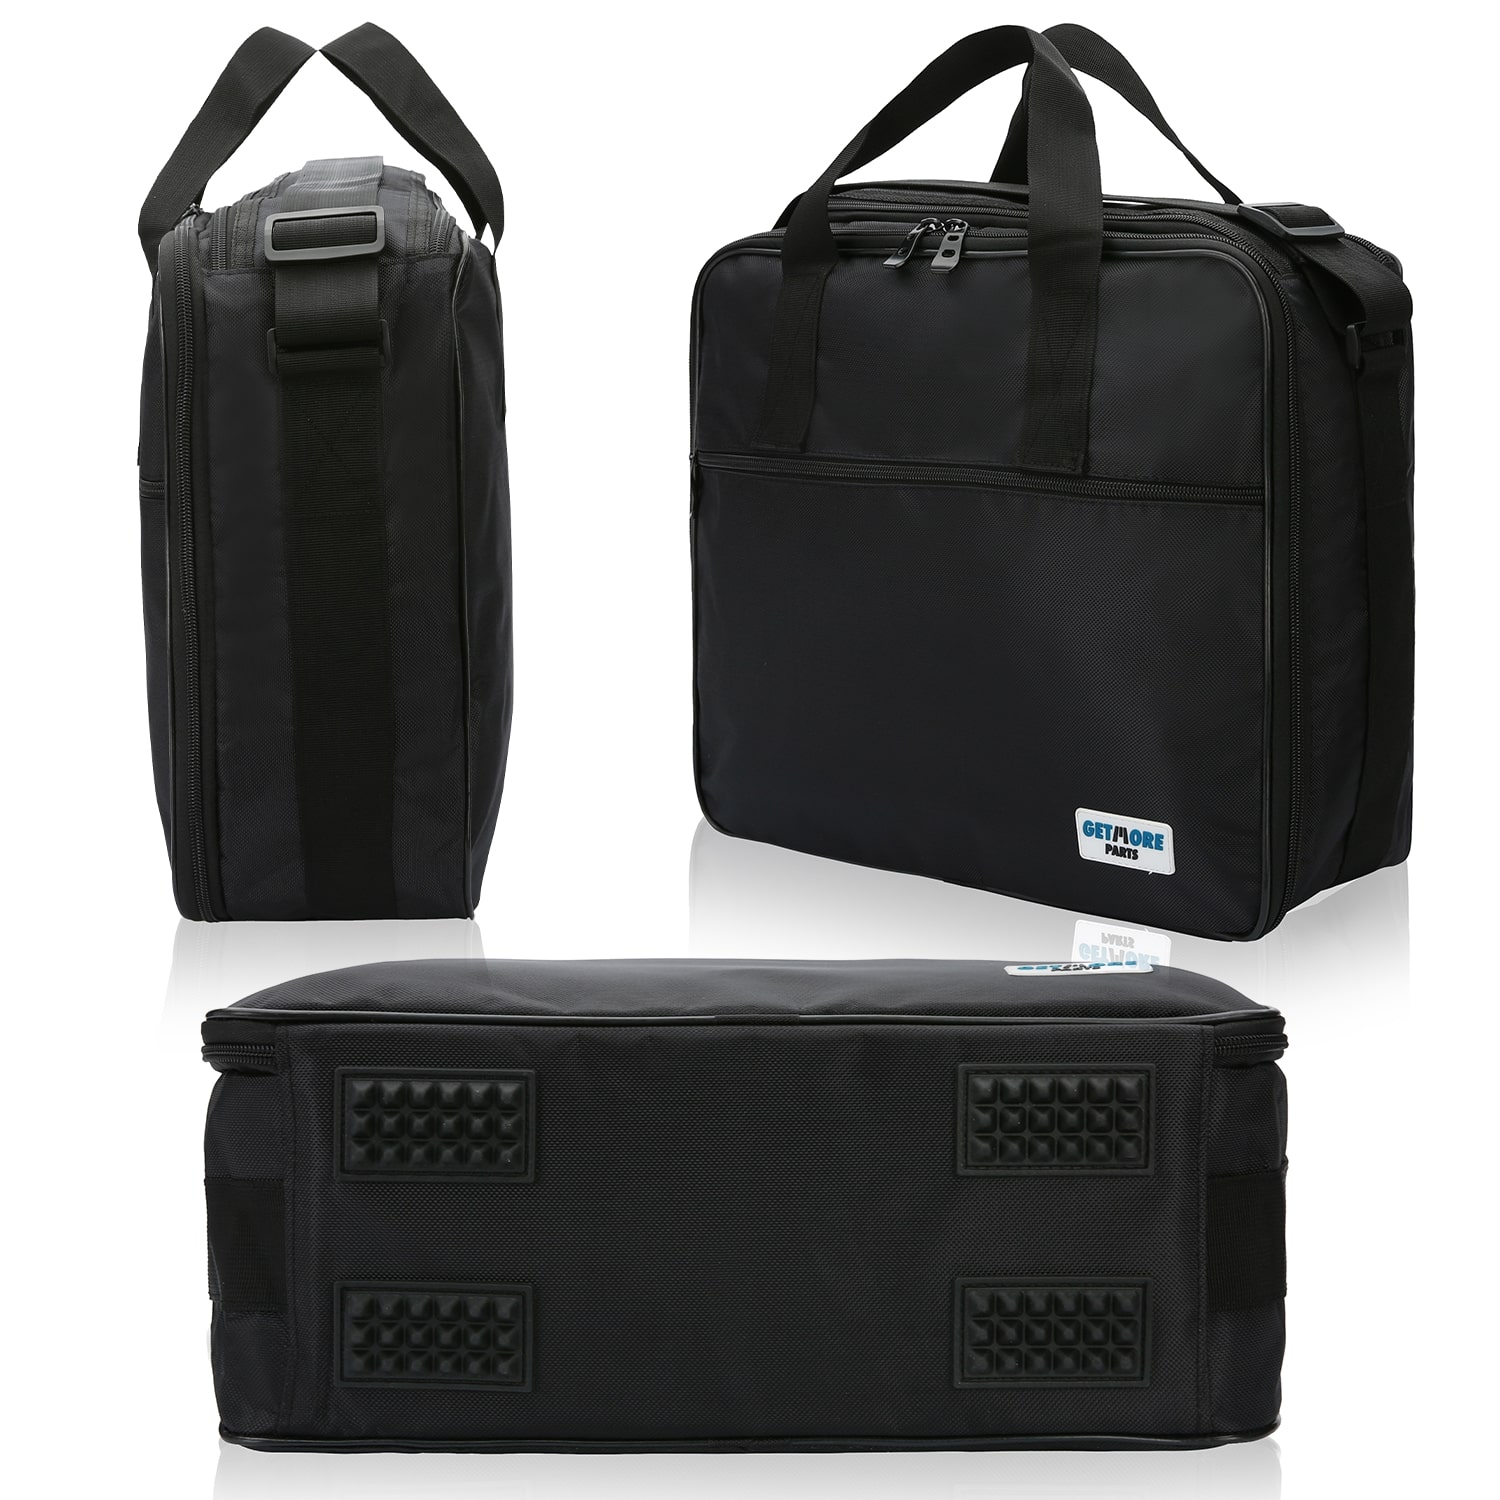 Inner bags for Yamaha Touring cases